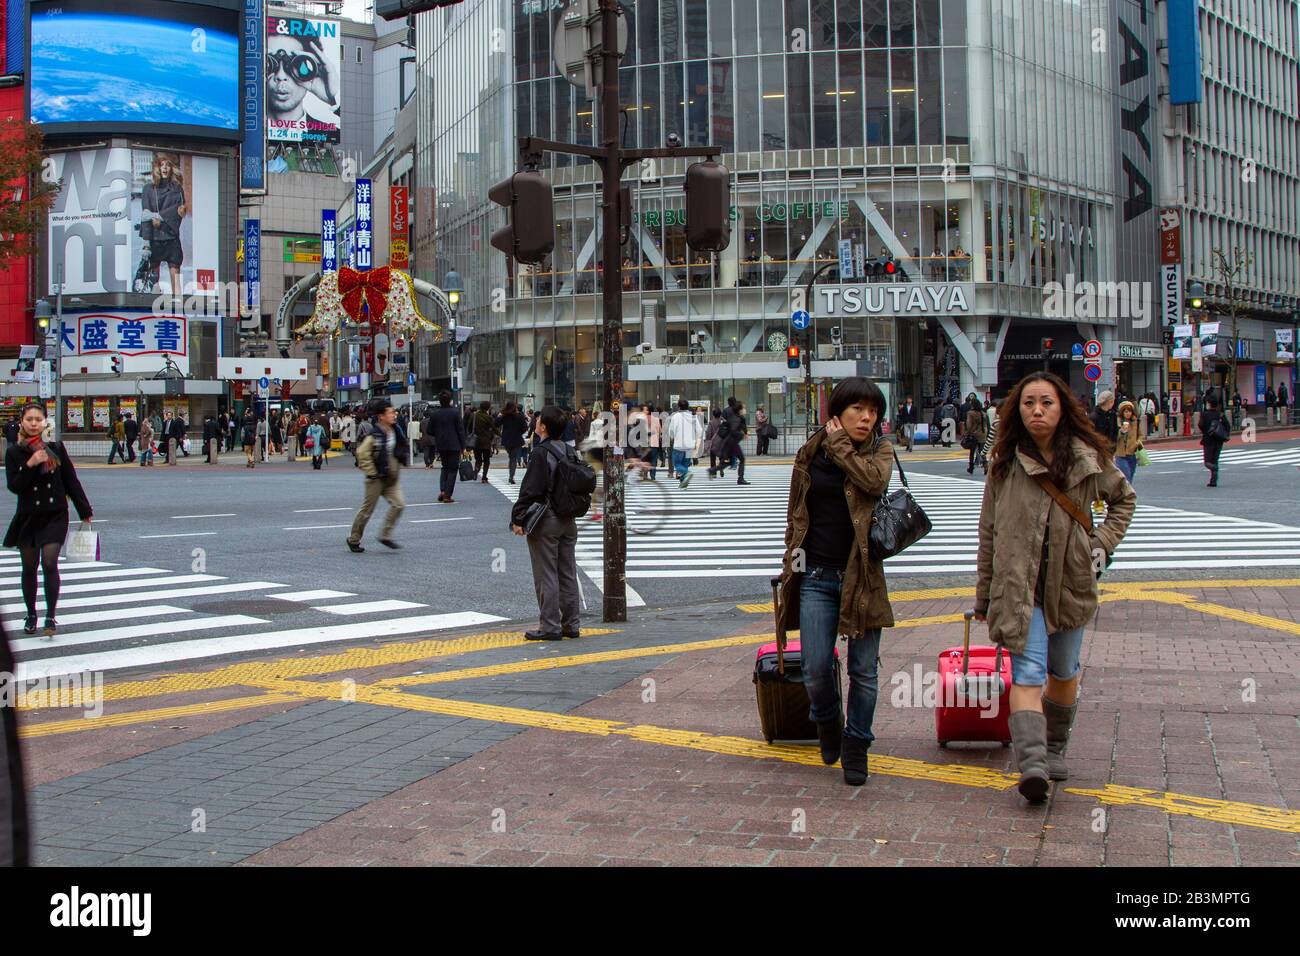 People in central Tokyo, Japan Stock Photo